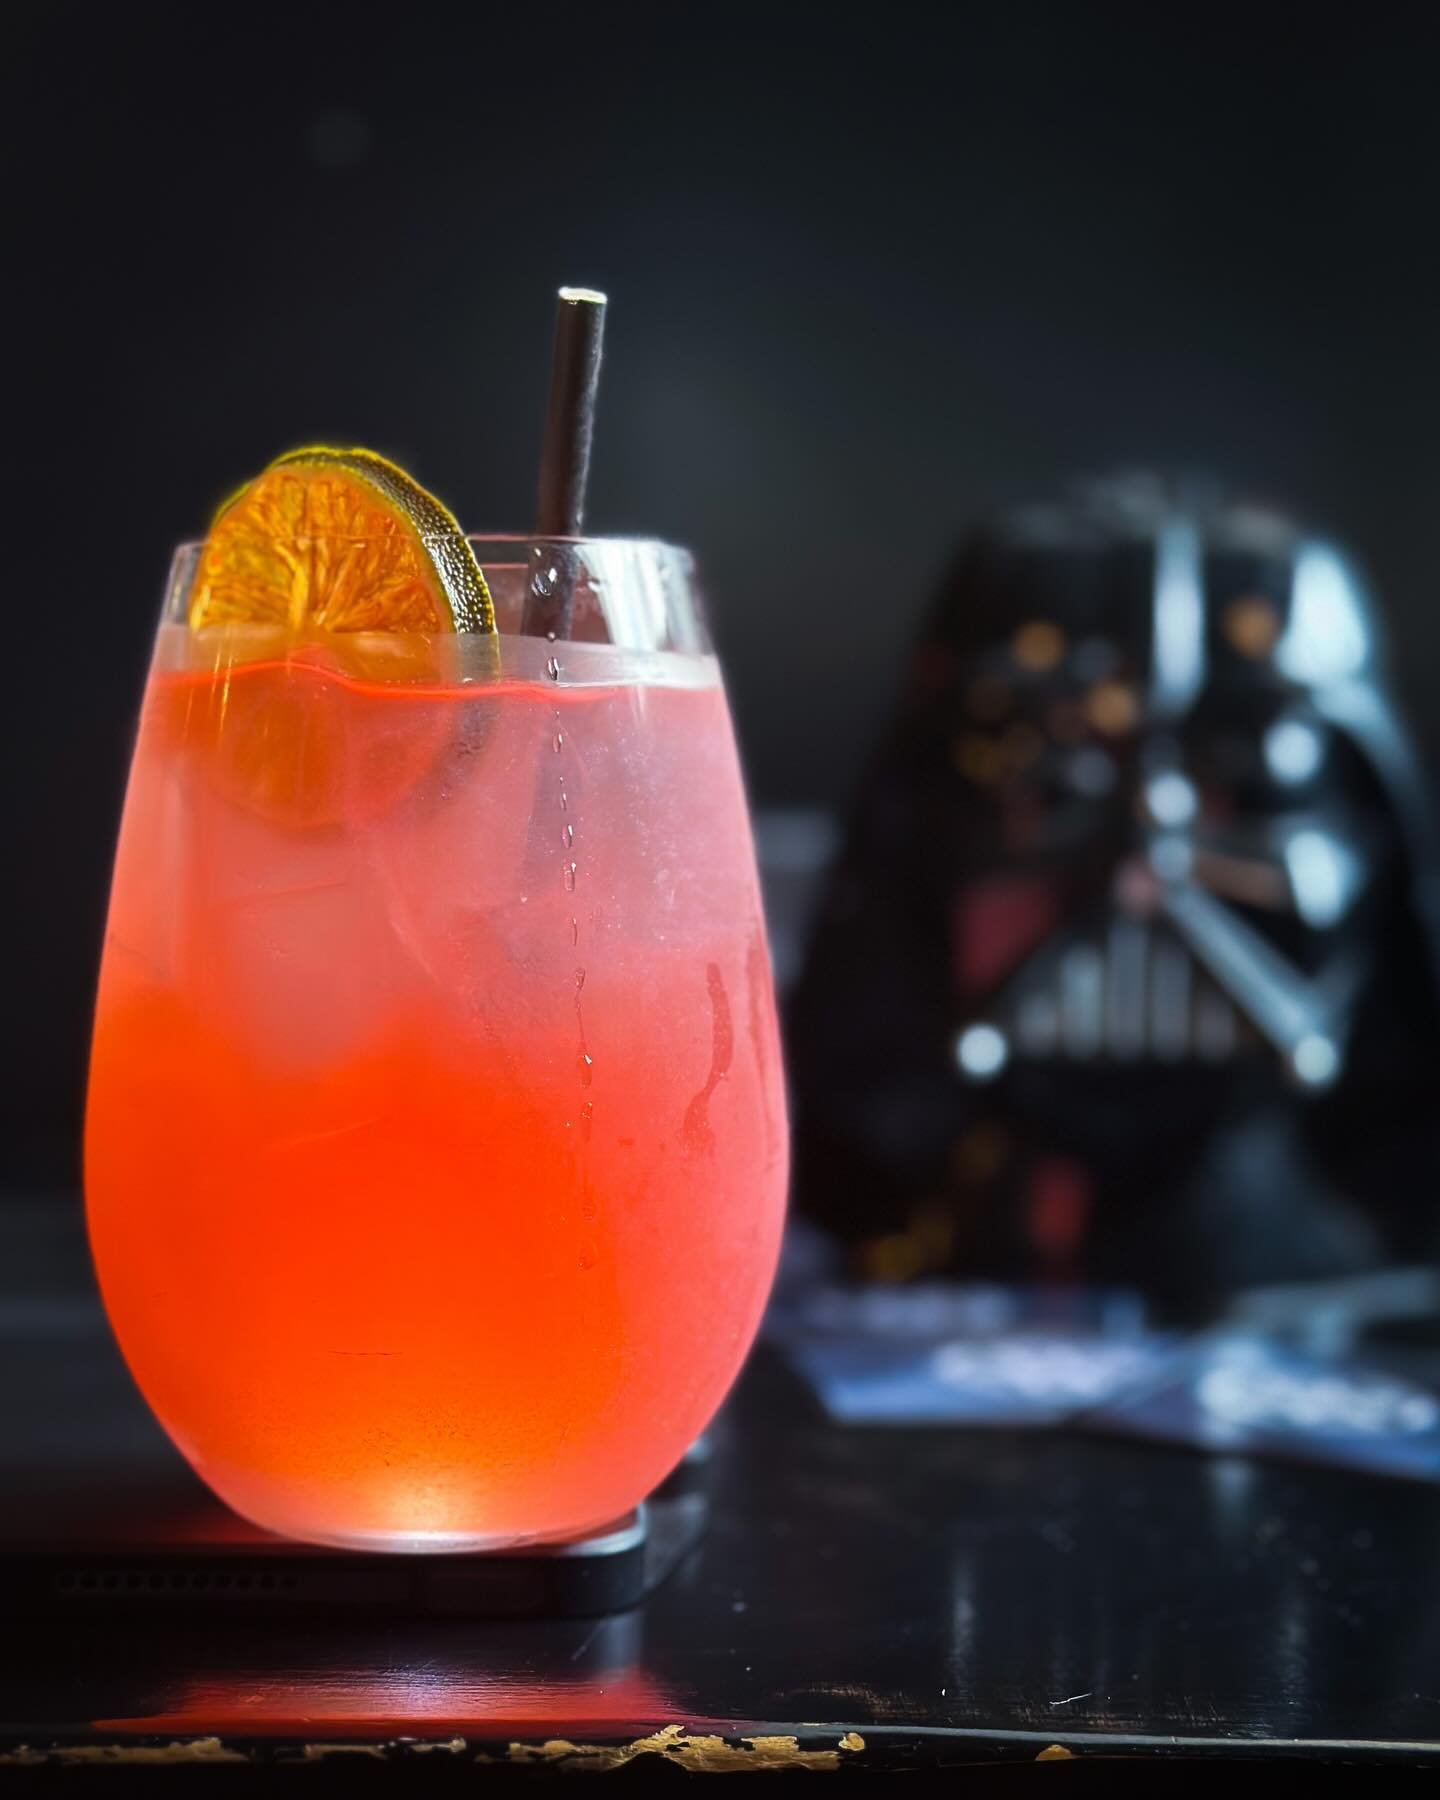 Hey you stuck-up half-witted scruffy-looking NERF HERDER!
Yeah YOU!

Join us Star Wars nerds on Saturday May the Fourth for all the dishes and drinks inspired from Black Spire Outpost on BATUU &amp; Dex&rsquo;s Diner on CORUSCANT, curated by us Rebel